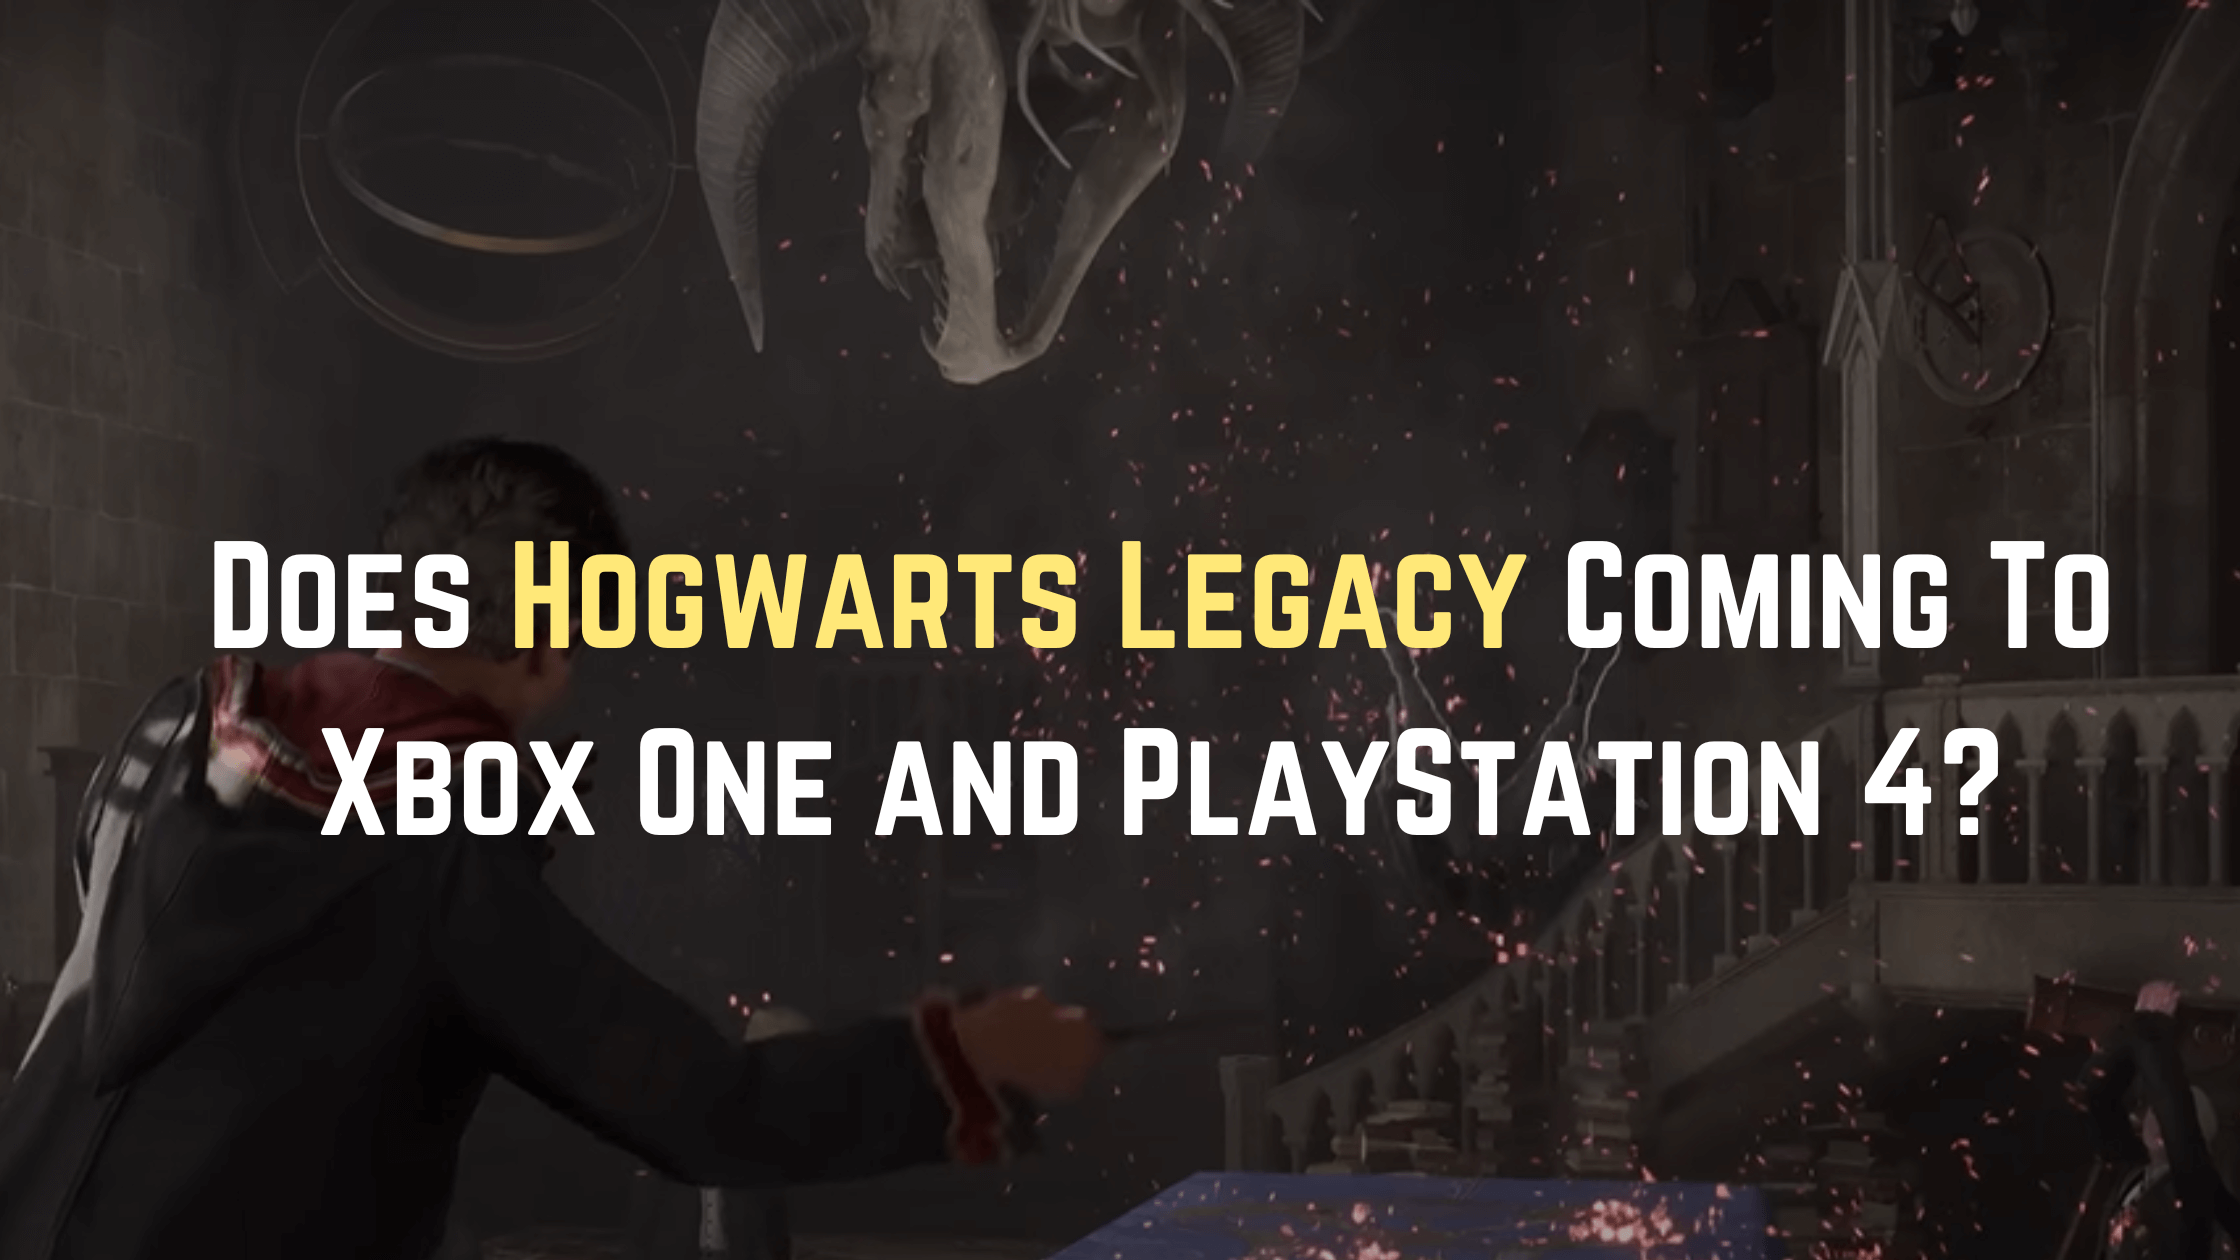 Does Hogwarts Legacy Coming To Xbox One and PlayStation 4